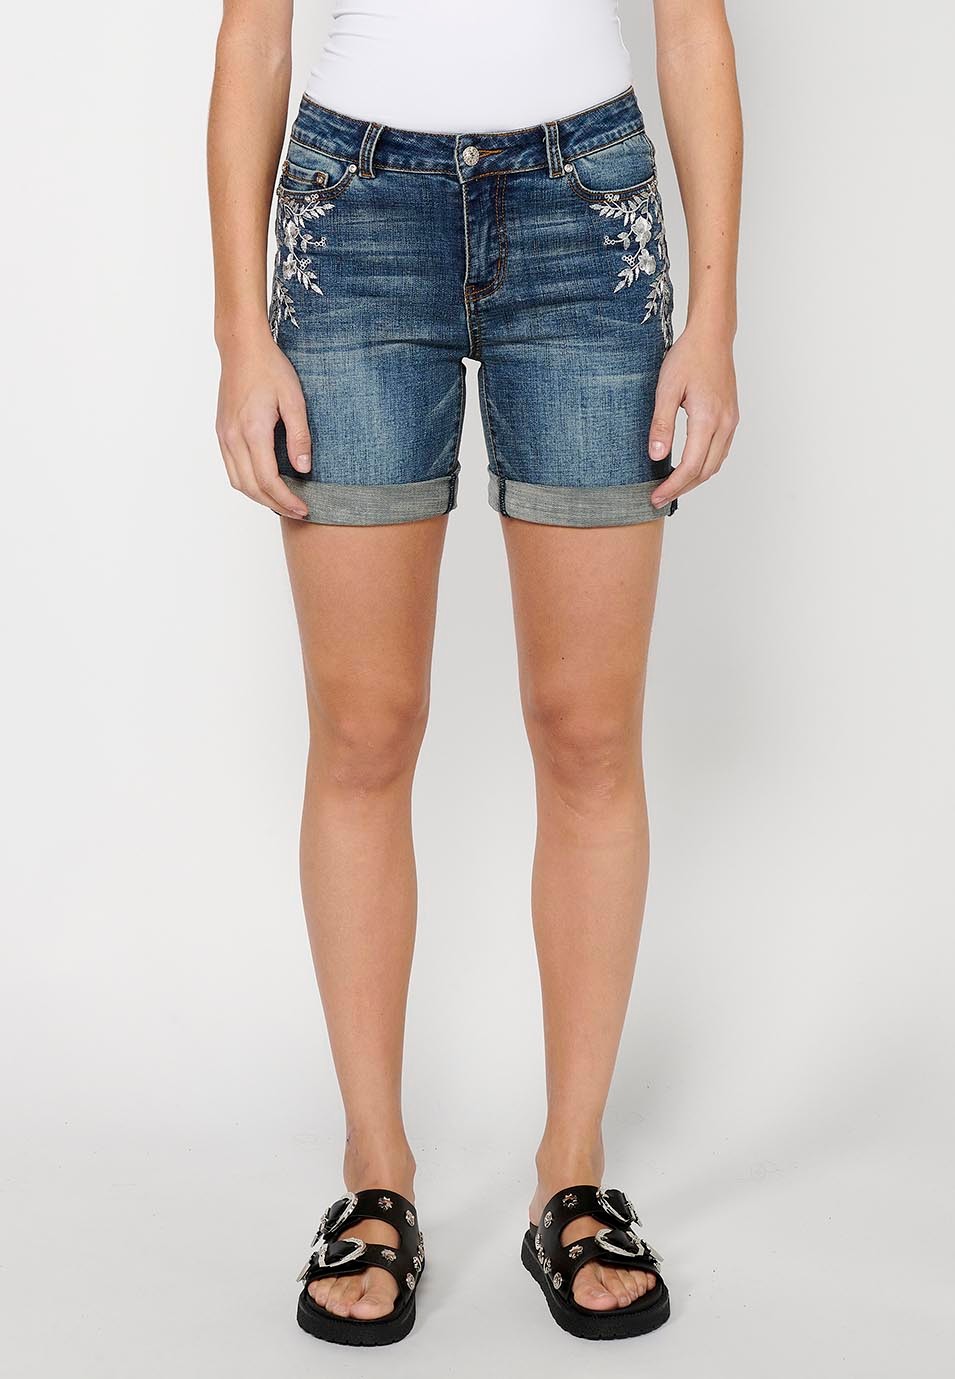 Short shorts with a turn-up finish with front zipper and button closure and blue floral embroidery for Women 3